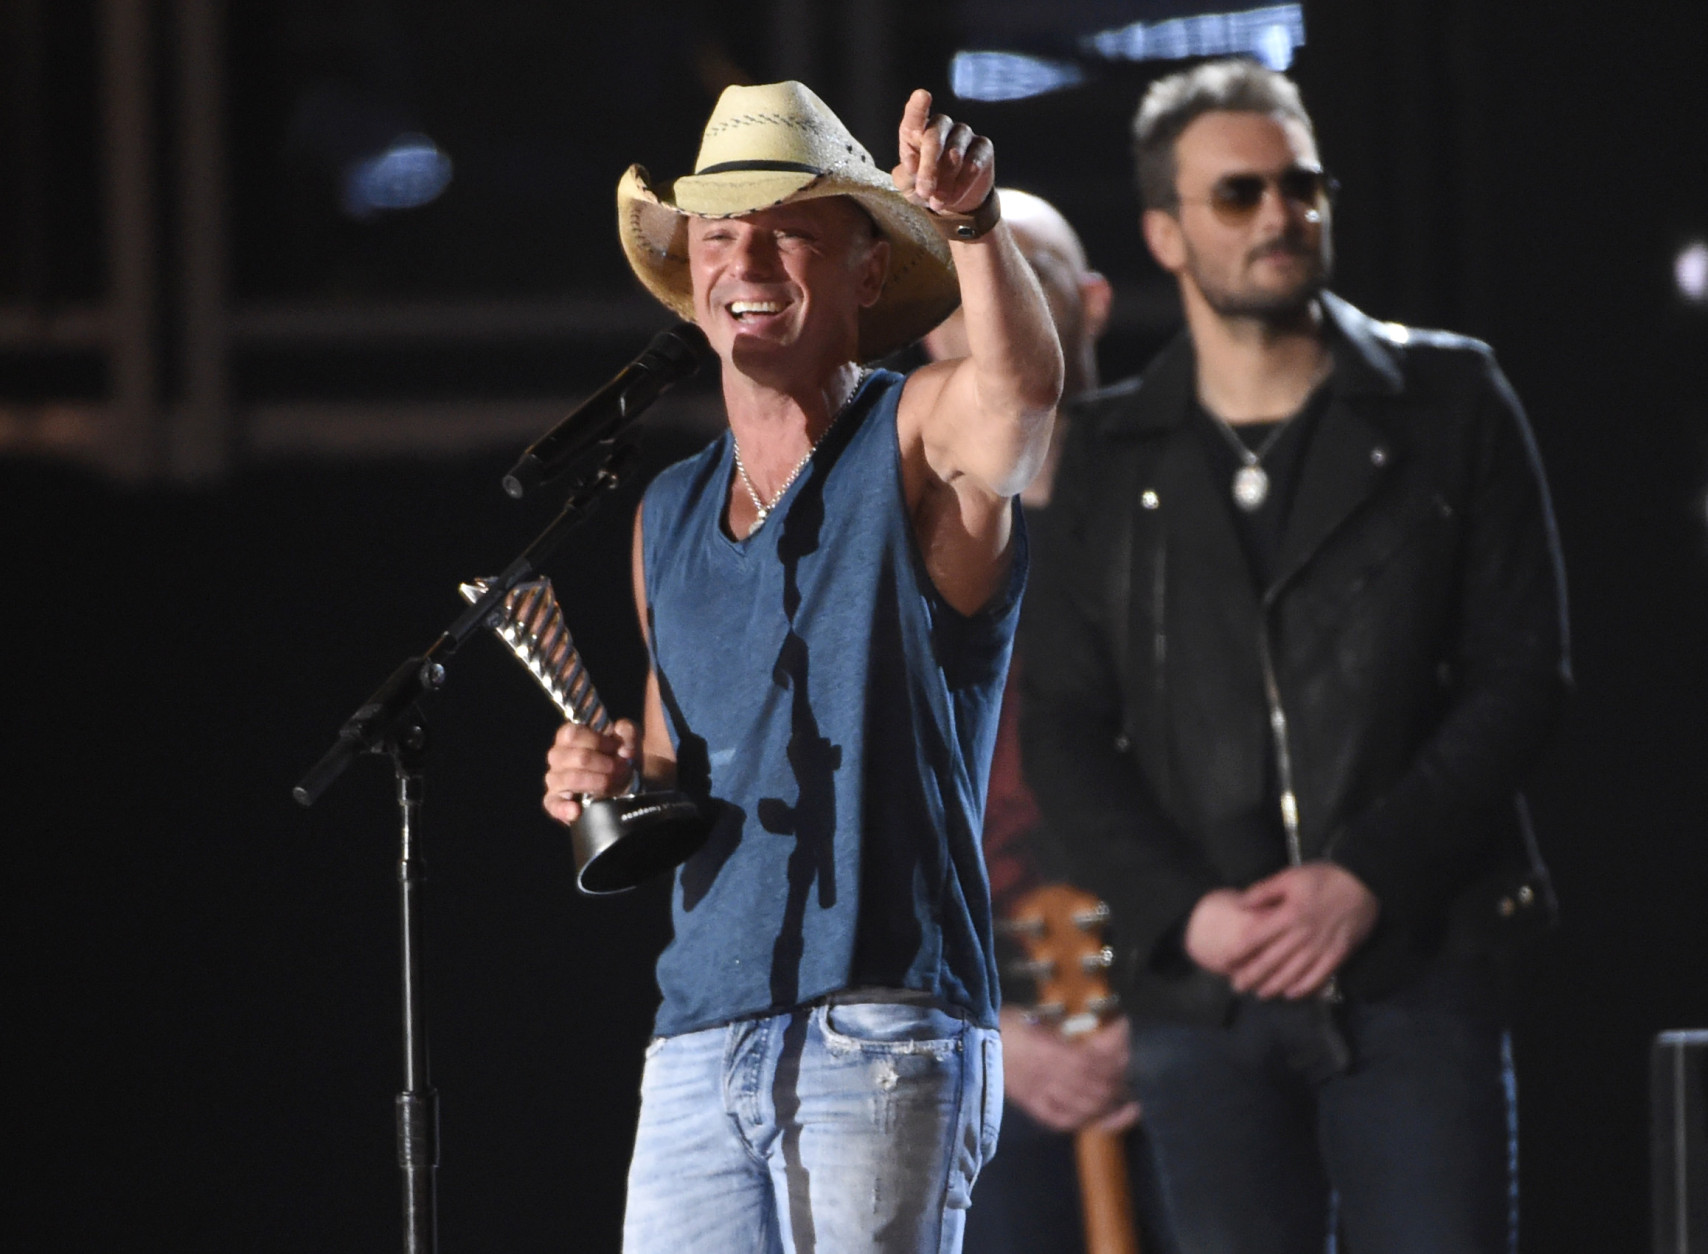 Kenny Chesney accepts the milestone award at the 50th annual Academy of Country Music Awards at AT&amp;T Stadium on Sunday, April 19, 2015, in Arlington, Texas. (Photo by Chris Pizzello/Invision/AP)